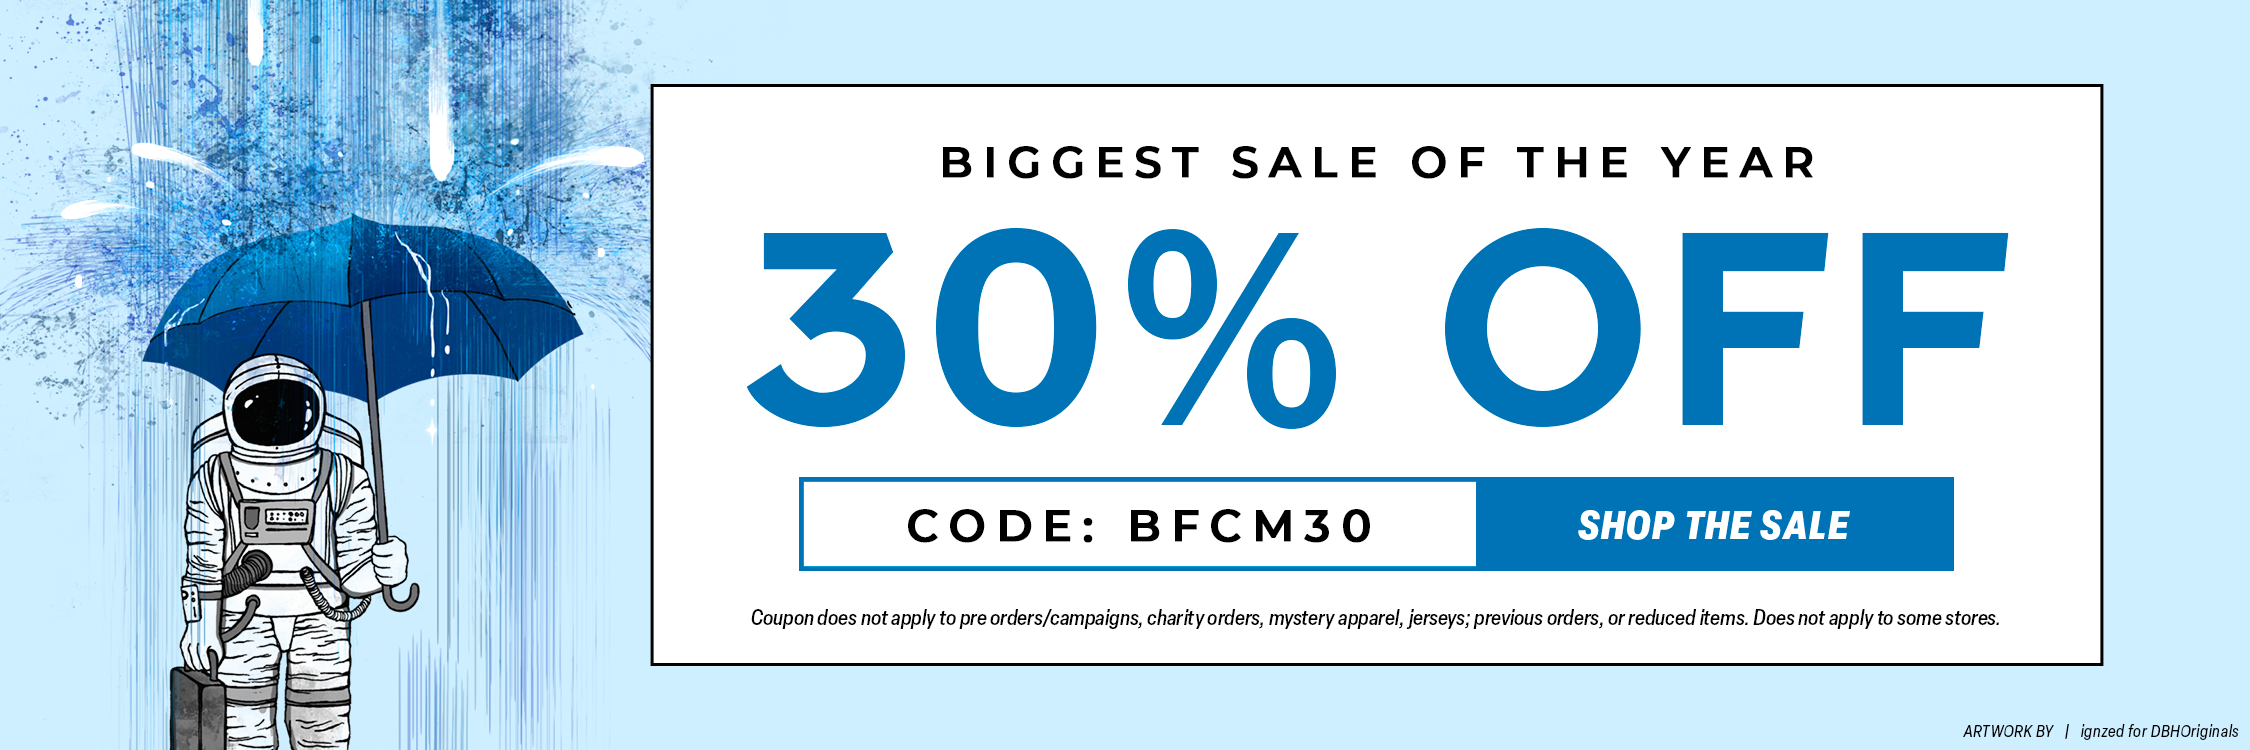 Hero Image: &quot;Biggest Sale of the Year. 30% off. Code BFCM30. Shop the Sale. Exclusions apply. Astronaut with umbr&quot;